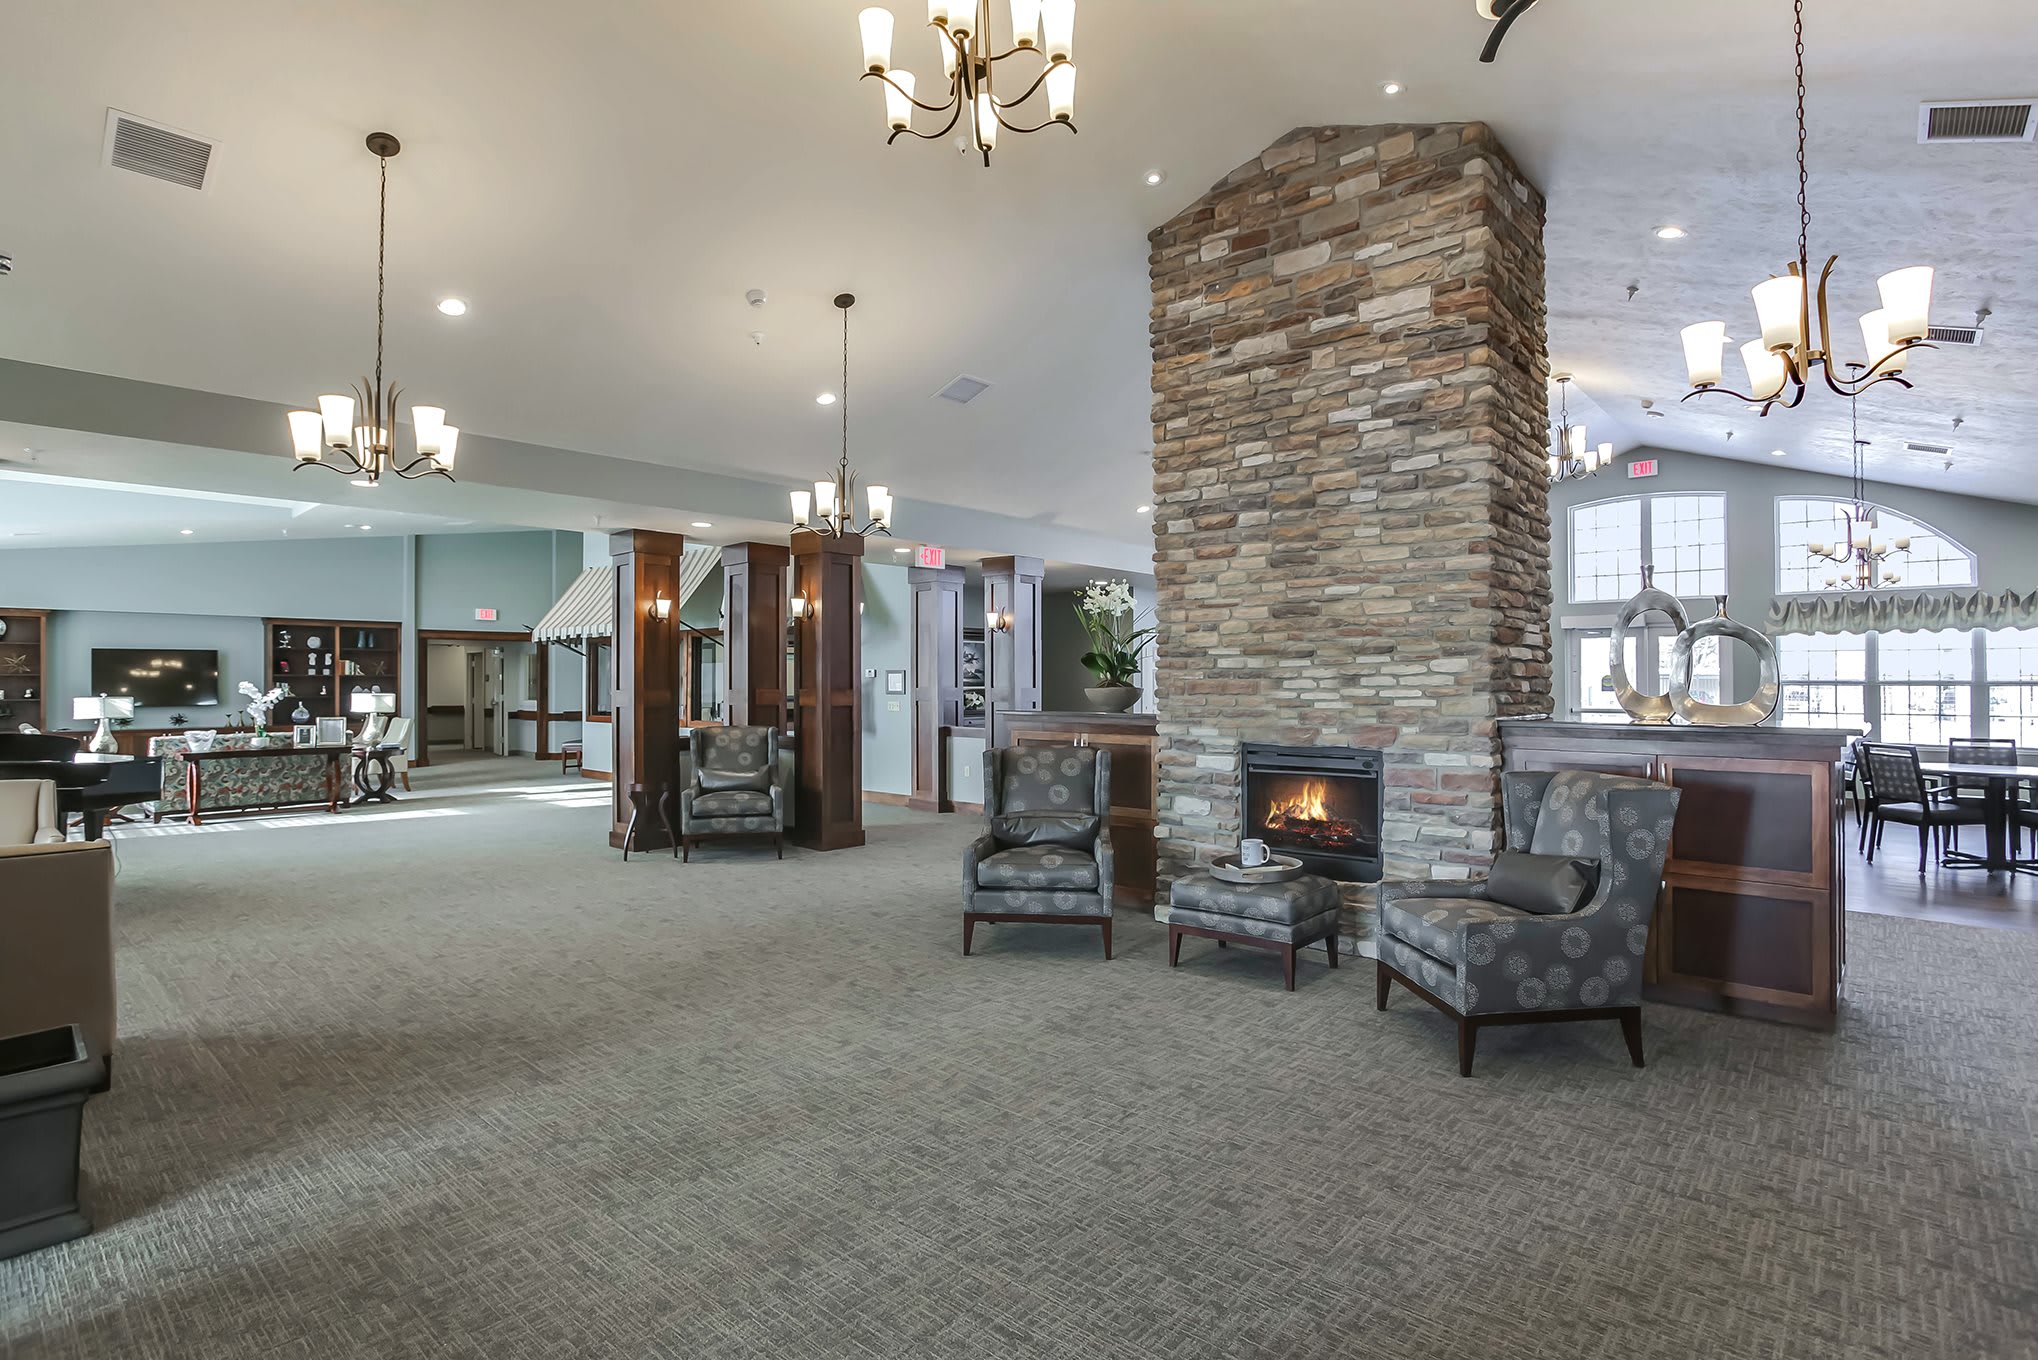 Grand Village Assisted Living and Memory Care lobby